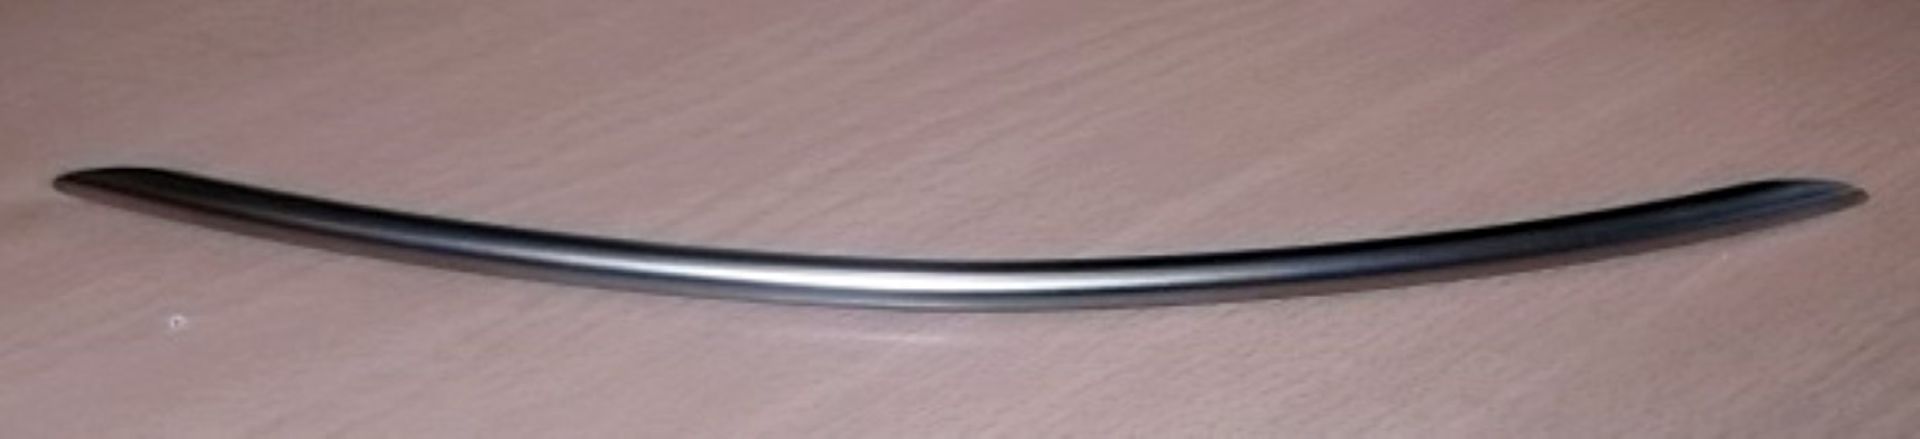 400 x BOW Handle Kitchen Door Handles By Crestwood - 320mm - New Stock - Brushed Nickel Finish - - Image 4 of 10